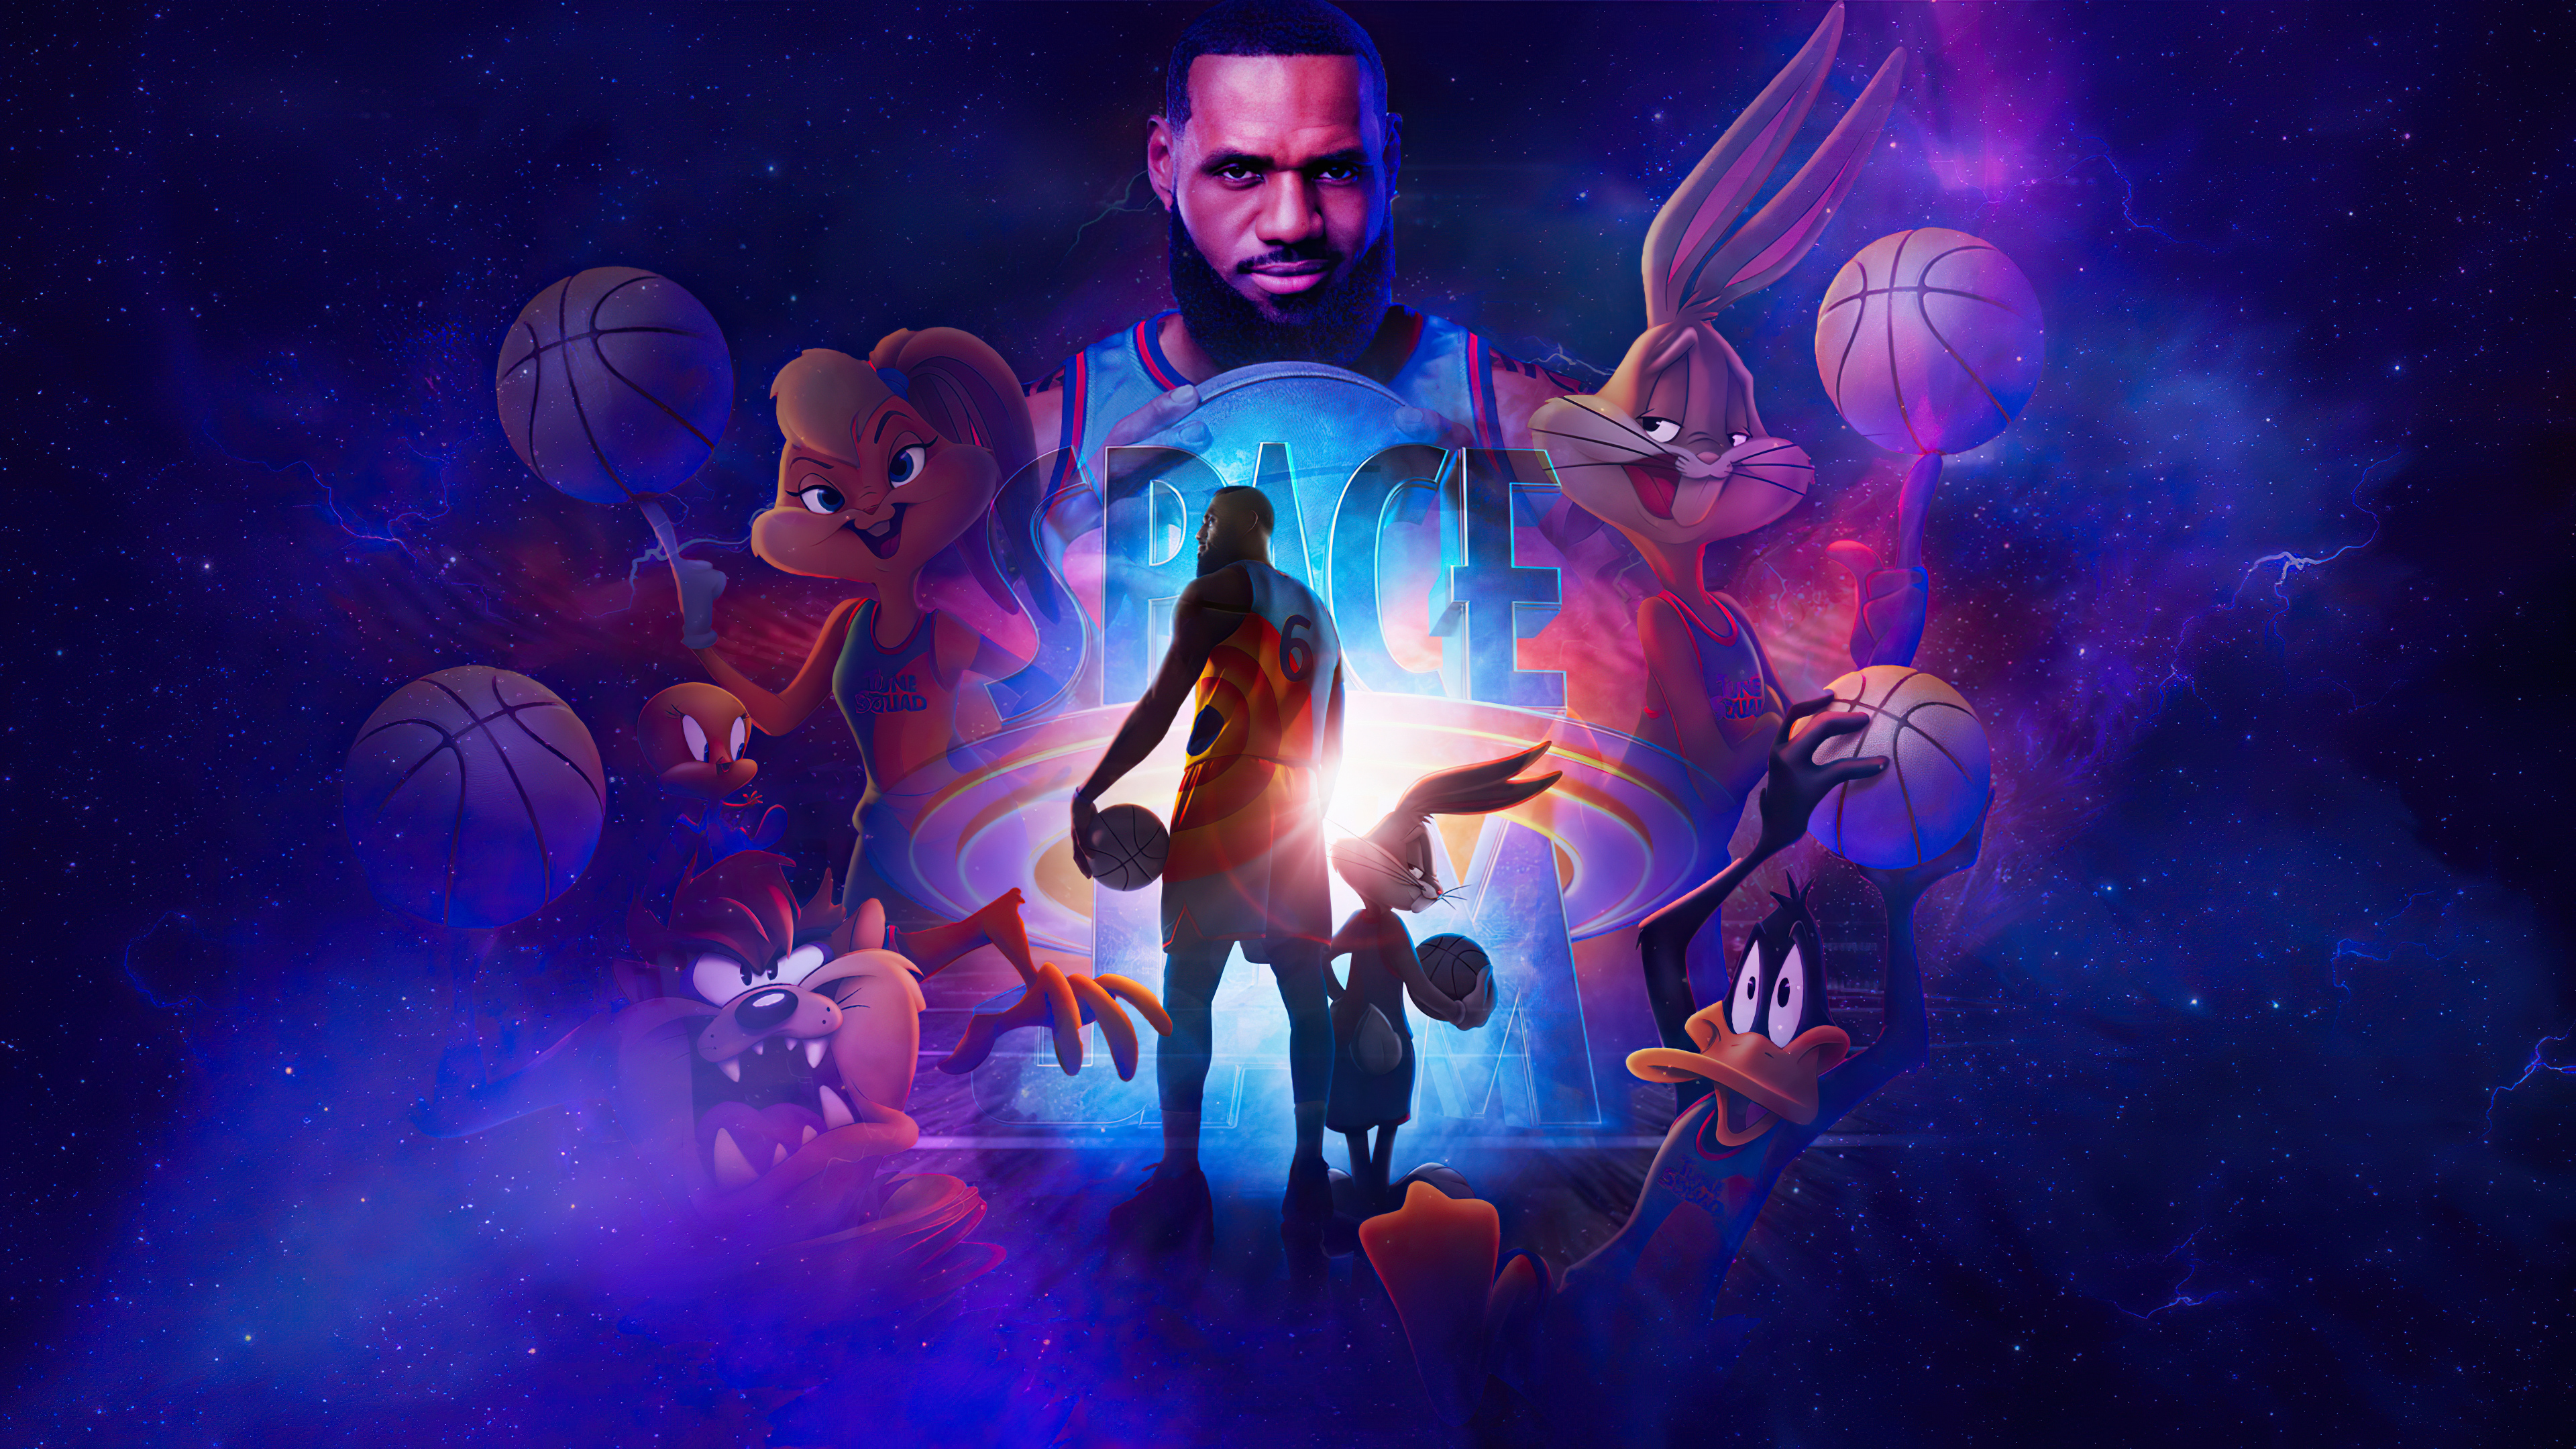 Movie Space Jam 2 HD Wallpaper | Background Image